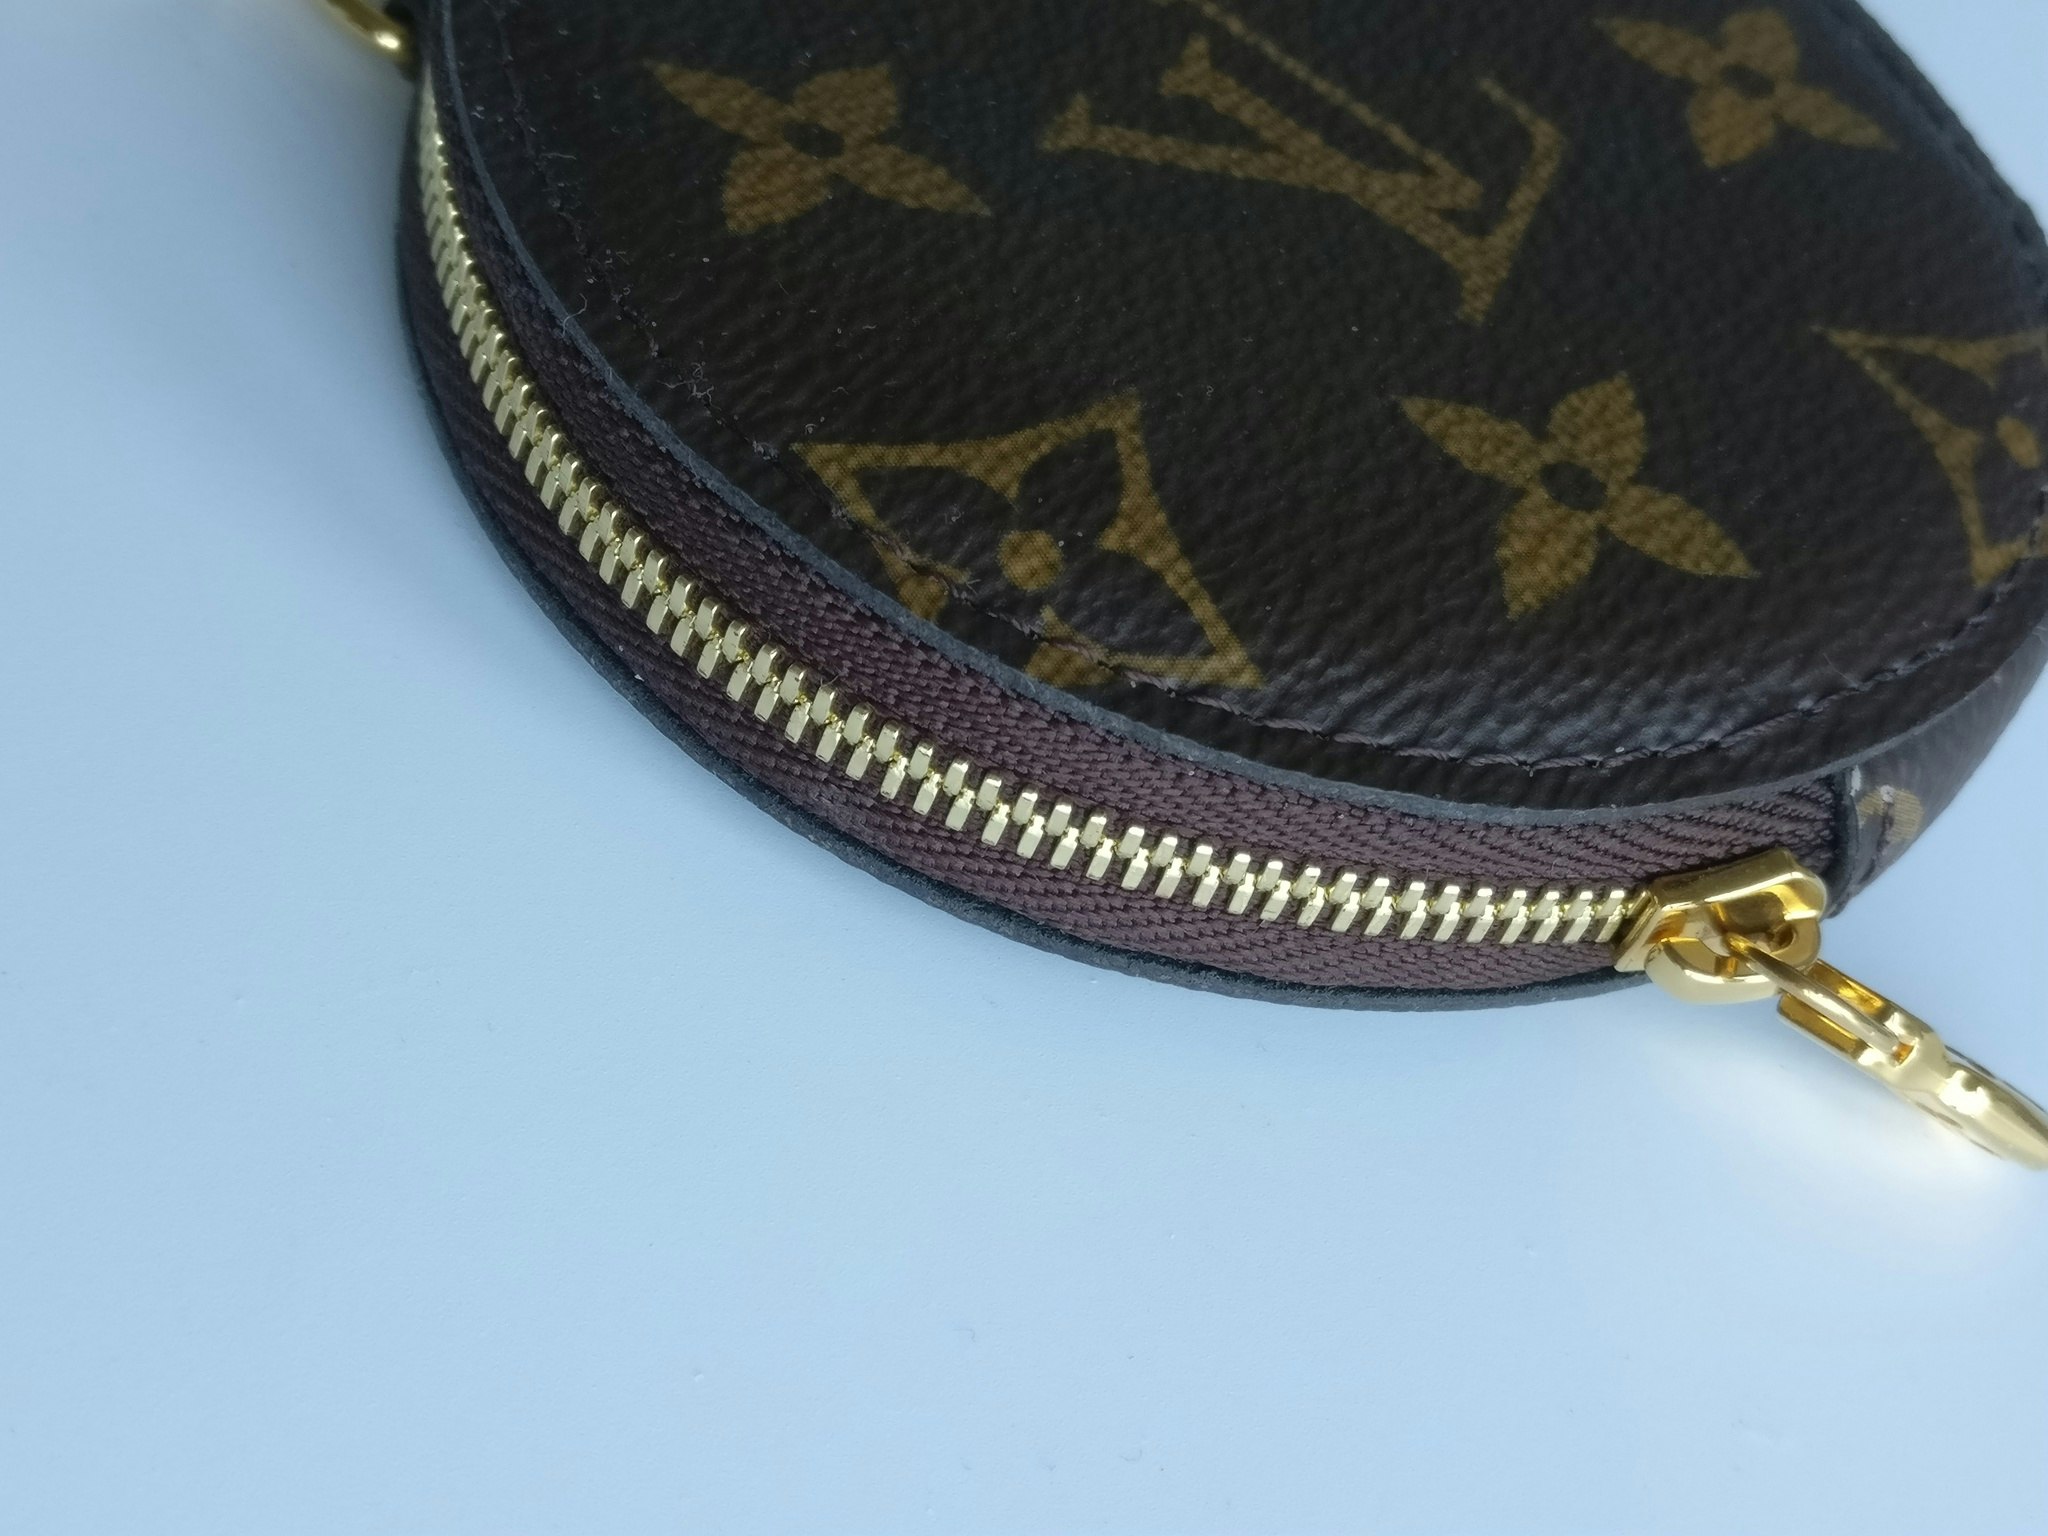 HOW TO TELL REAL VS FAKE LOUIS VUITTON COIN POUCH 